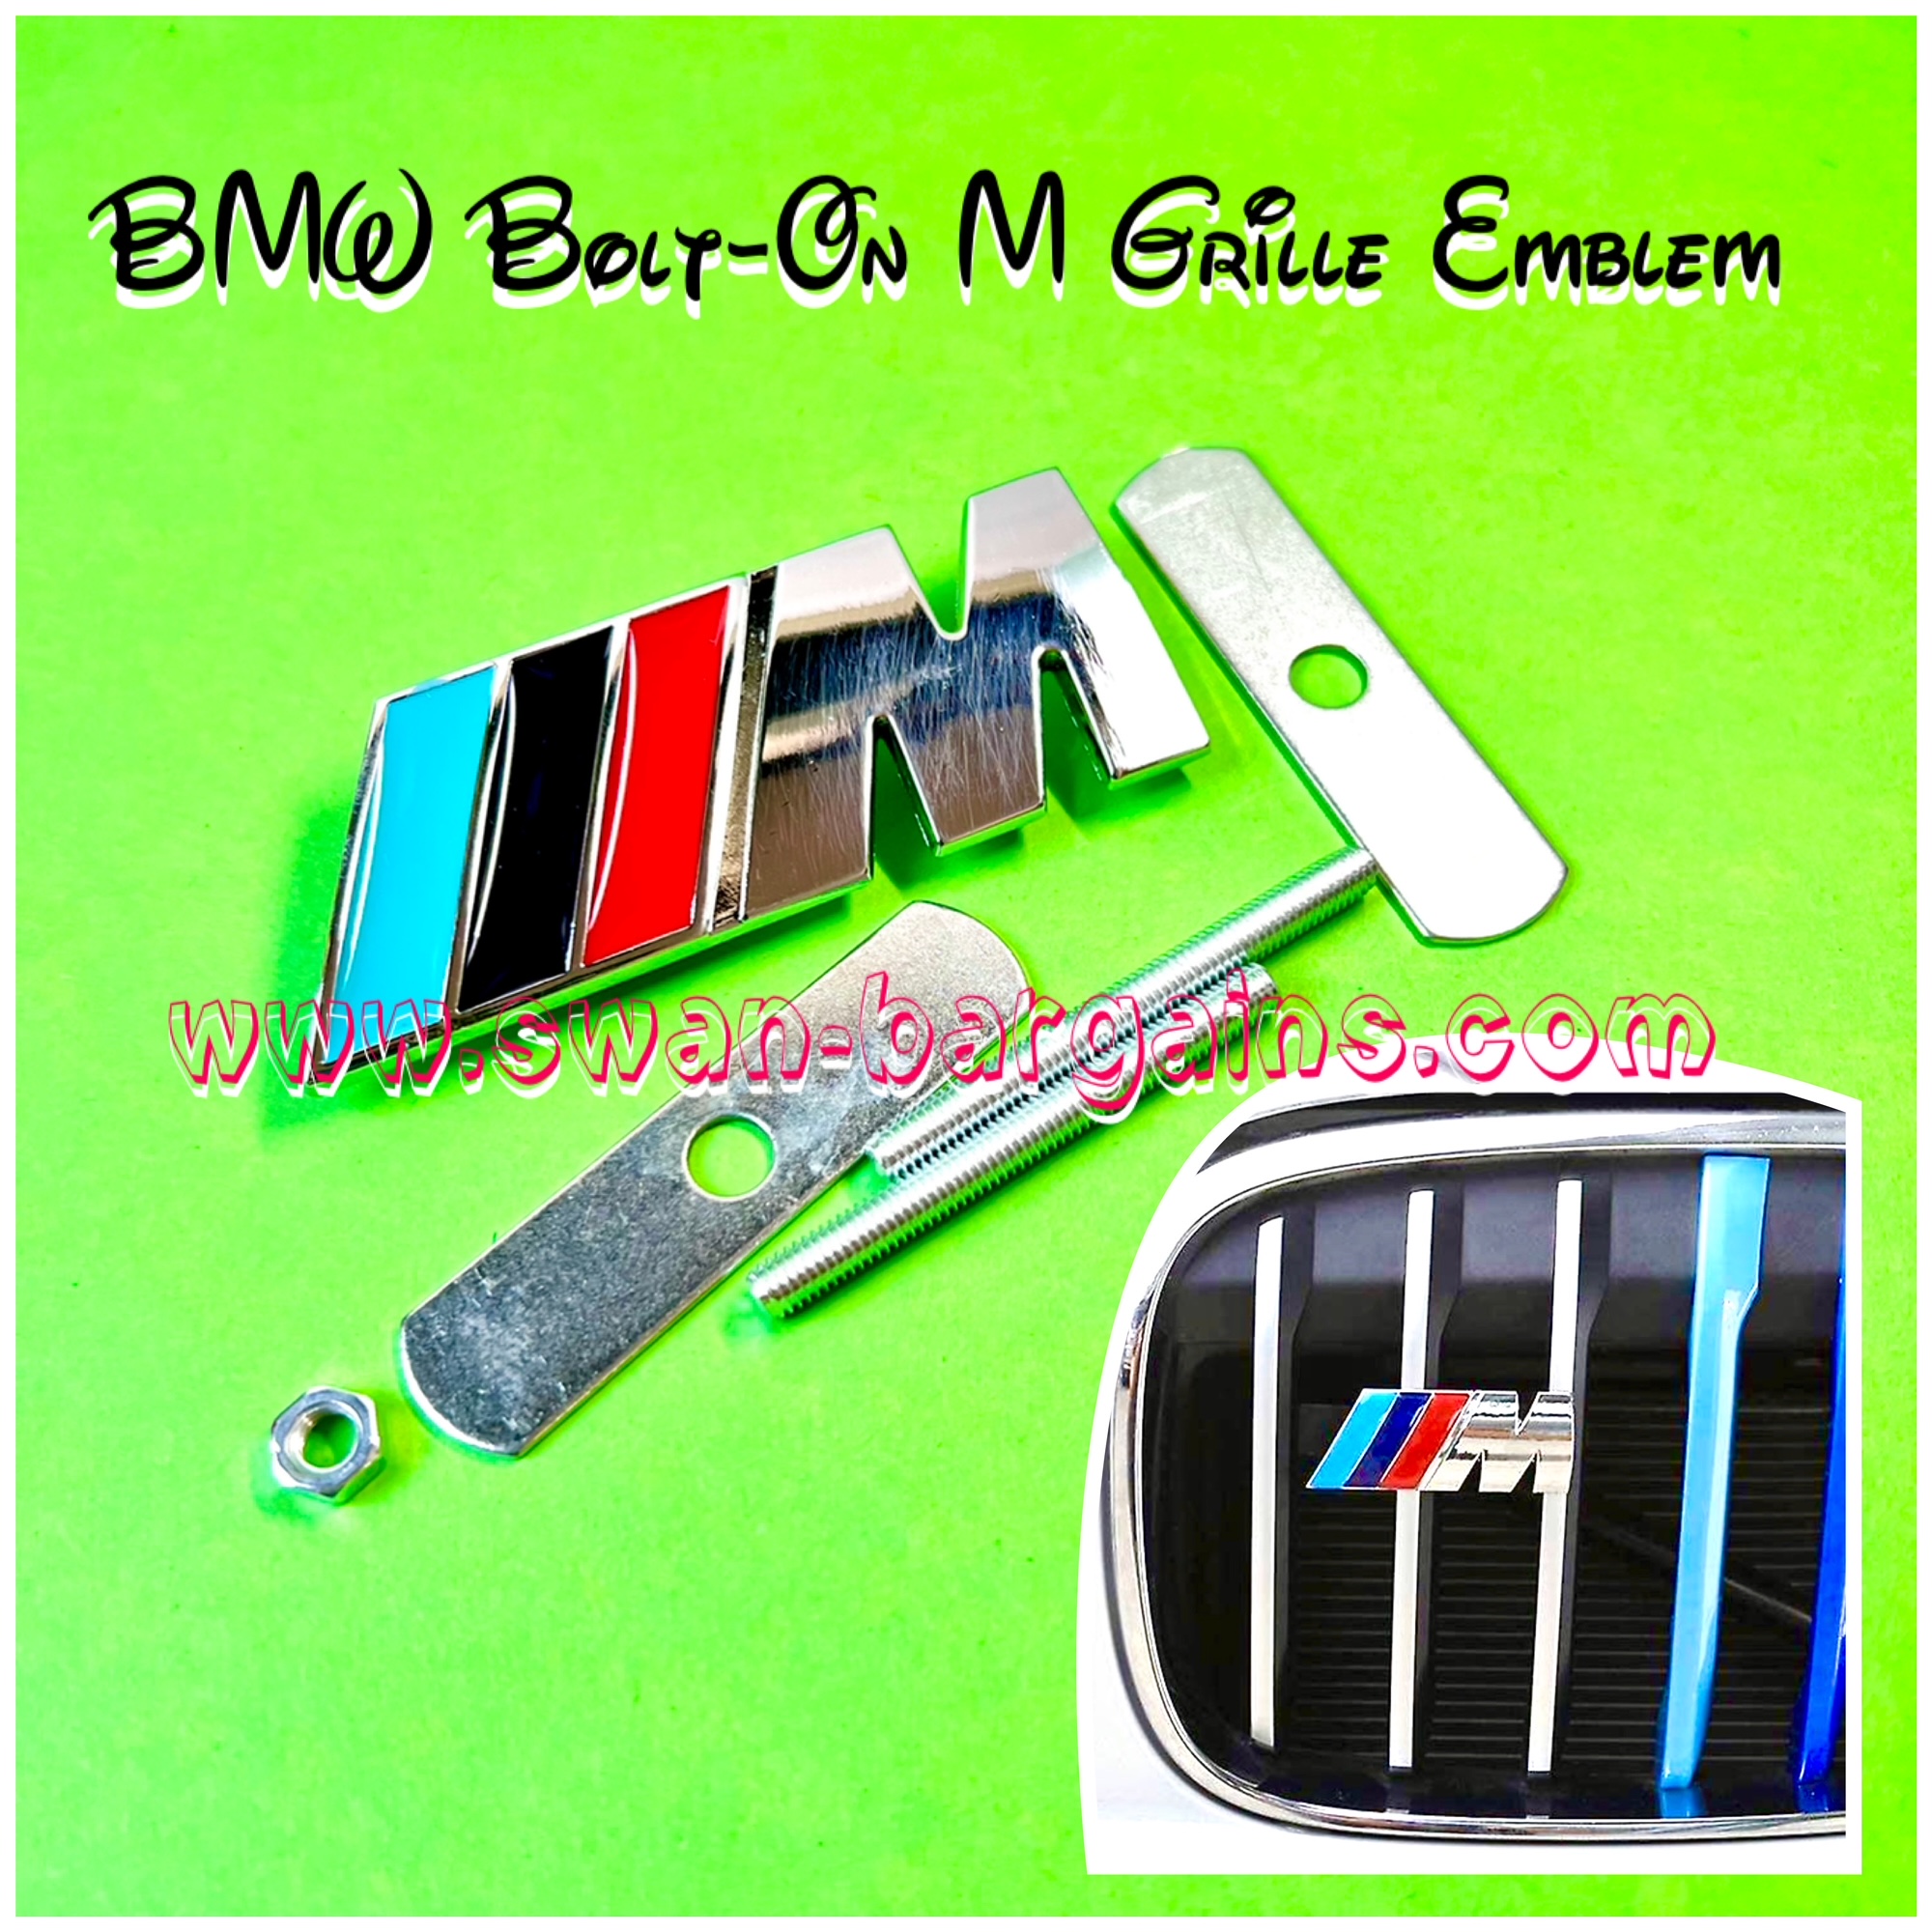 BMW M Power Grille Emblem – Welcome to Swan Bargains Online Store!